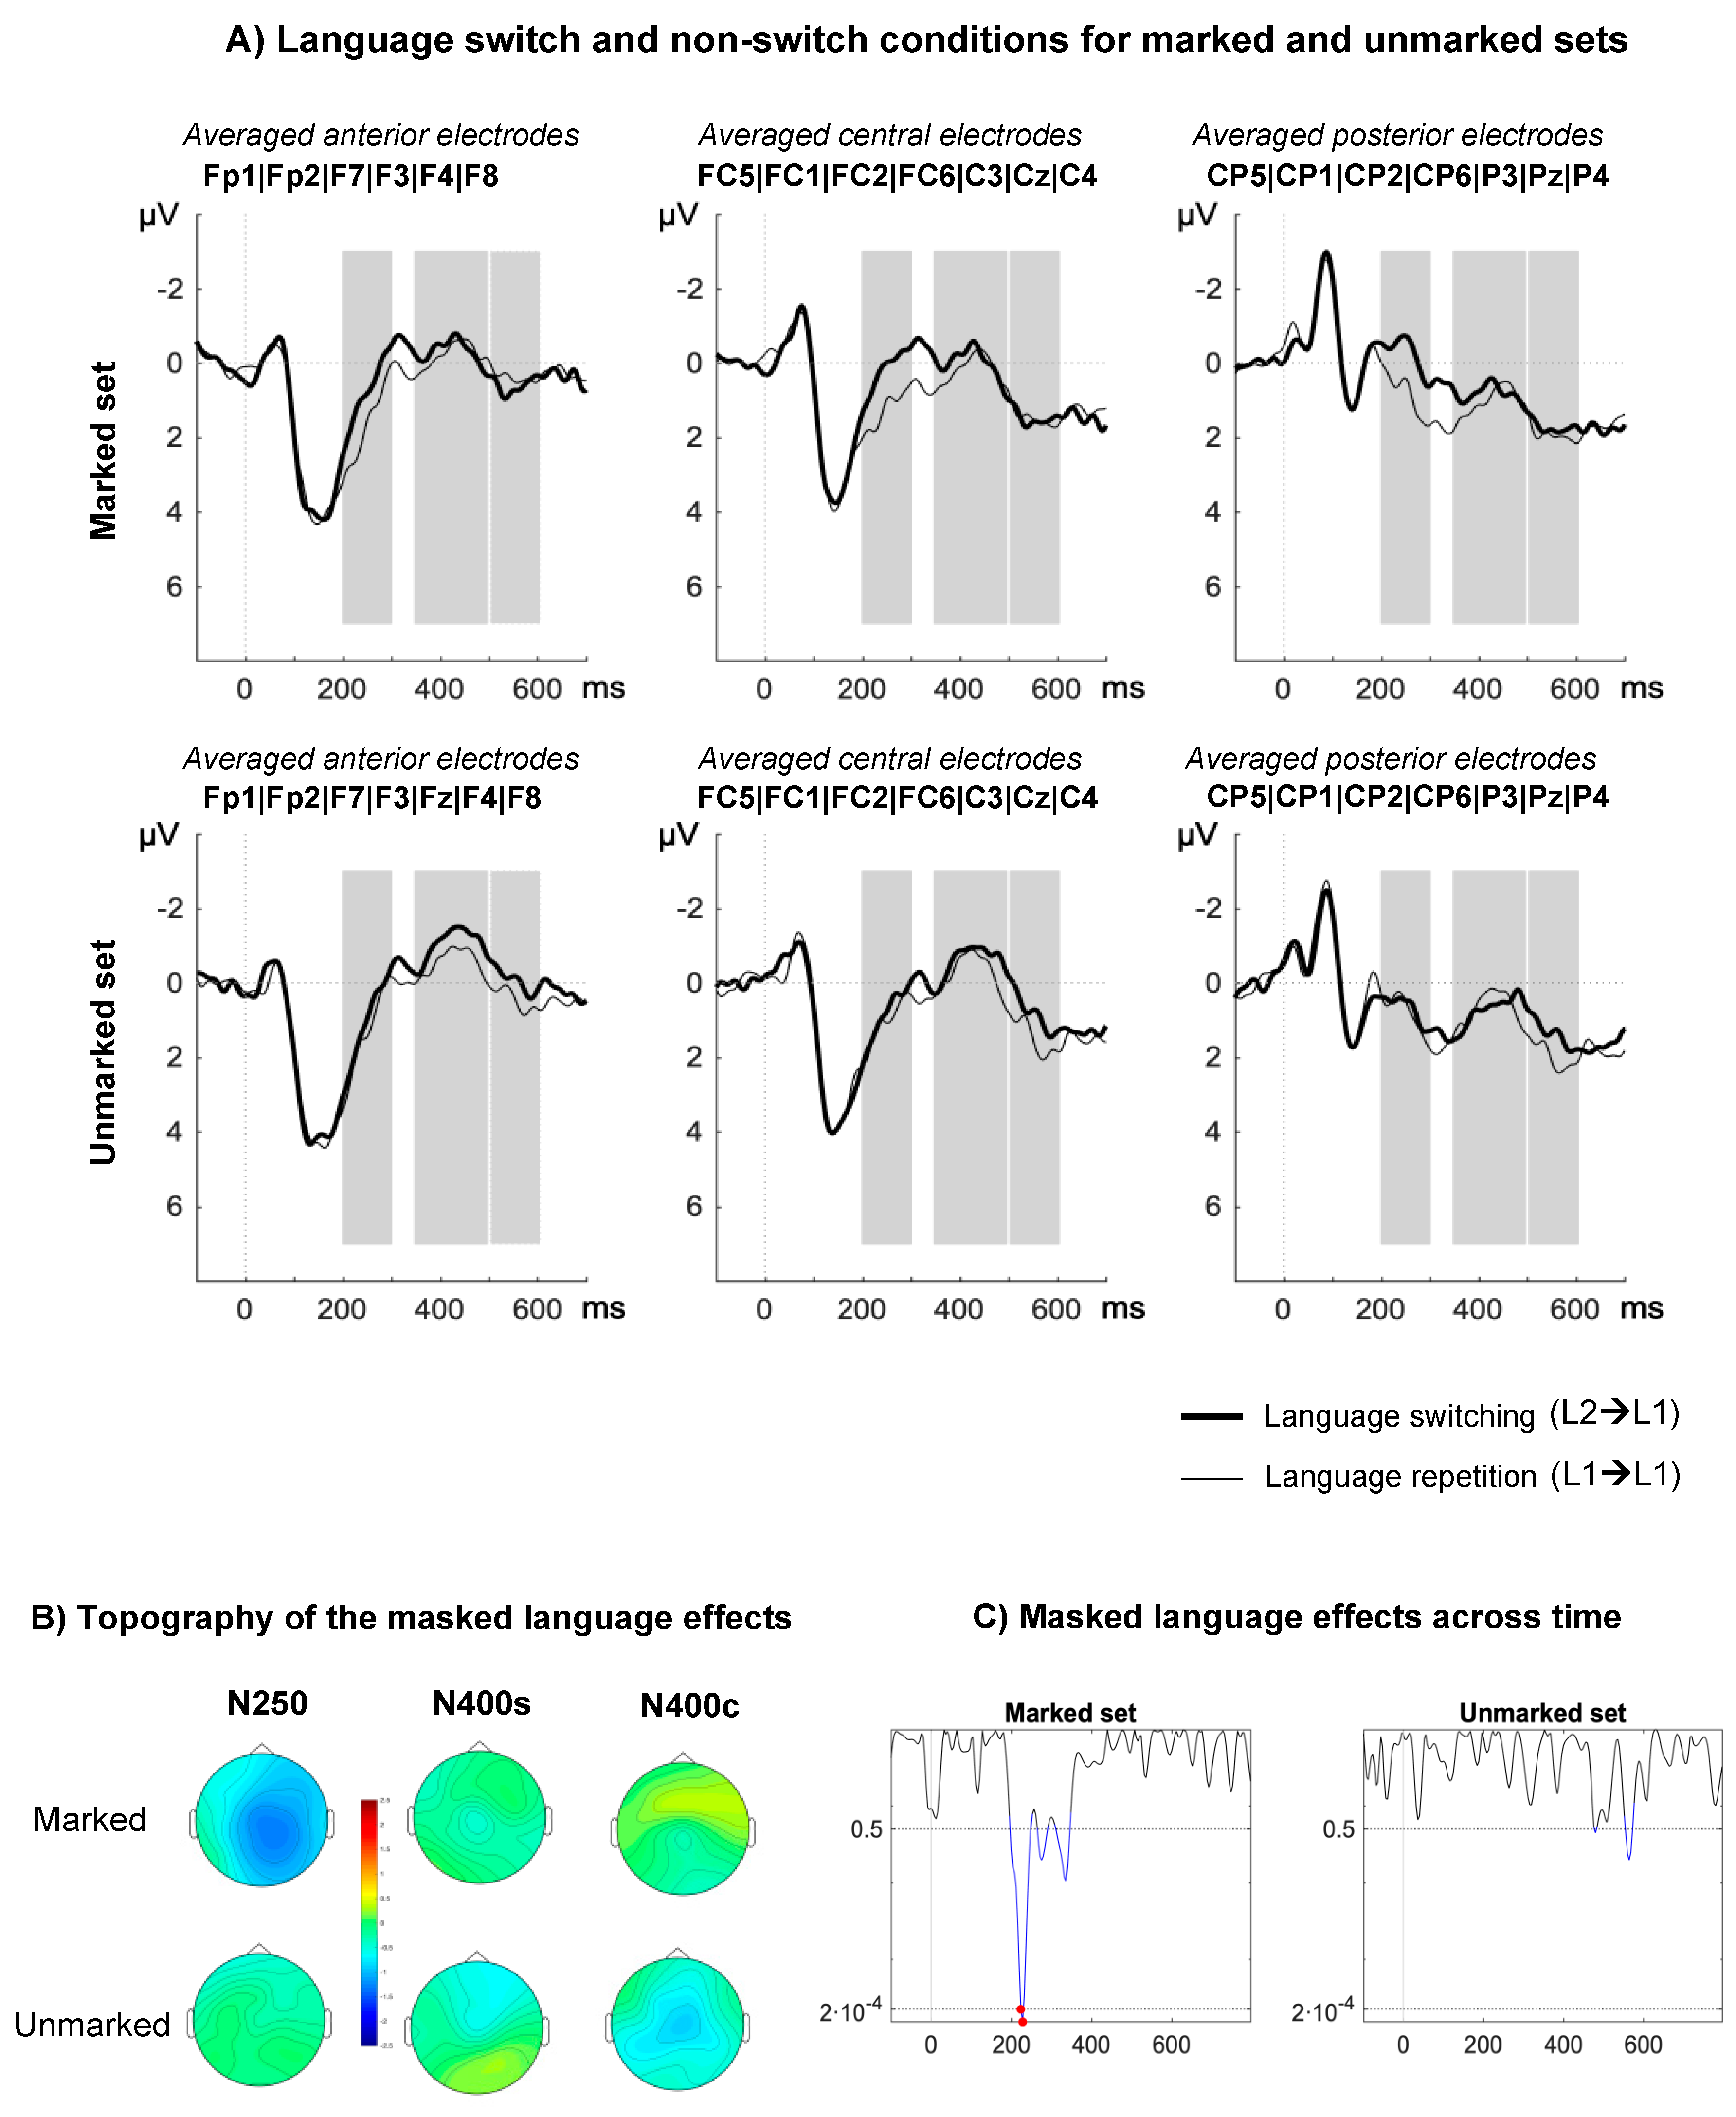 Brain Sciences Free Full Text The Role Of Orthotactics In Language Switching An Erp Investigation Using Masked Language Priming Html - viaje al aeropuerto la invacion robloxiana cap 2